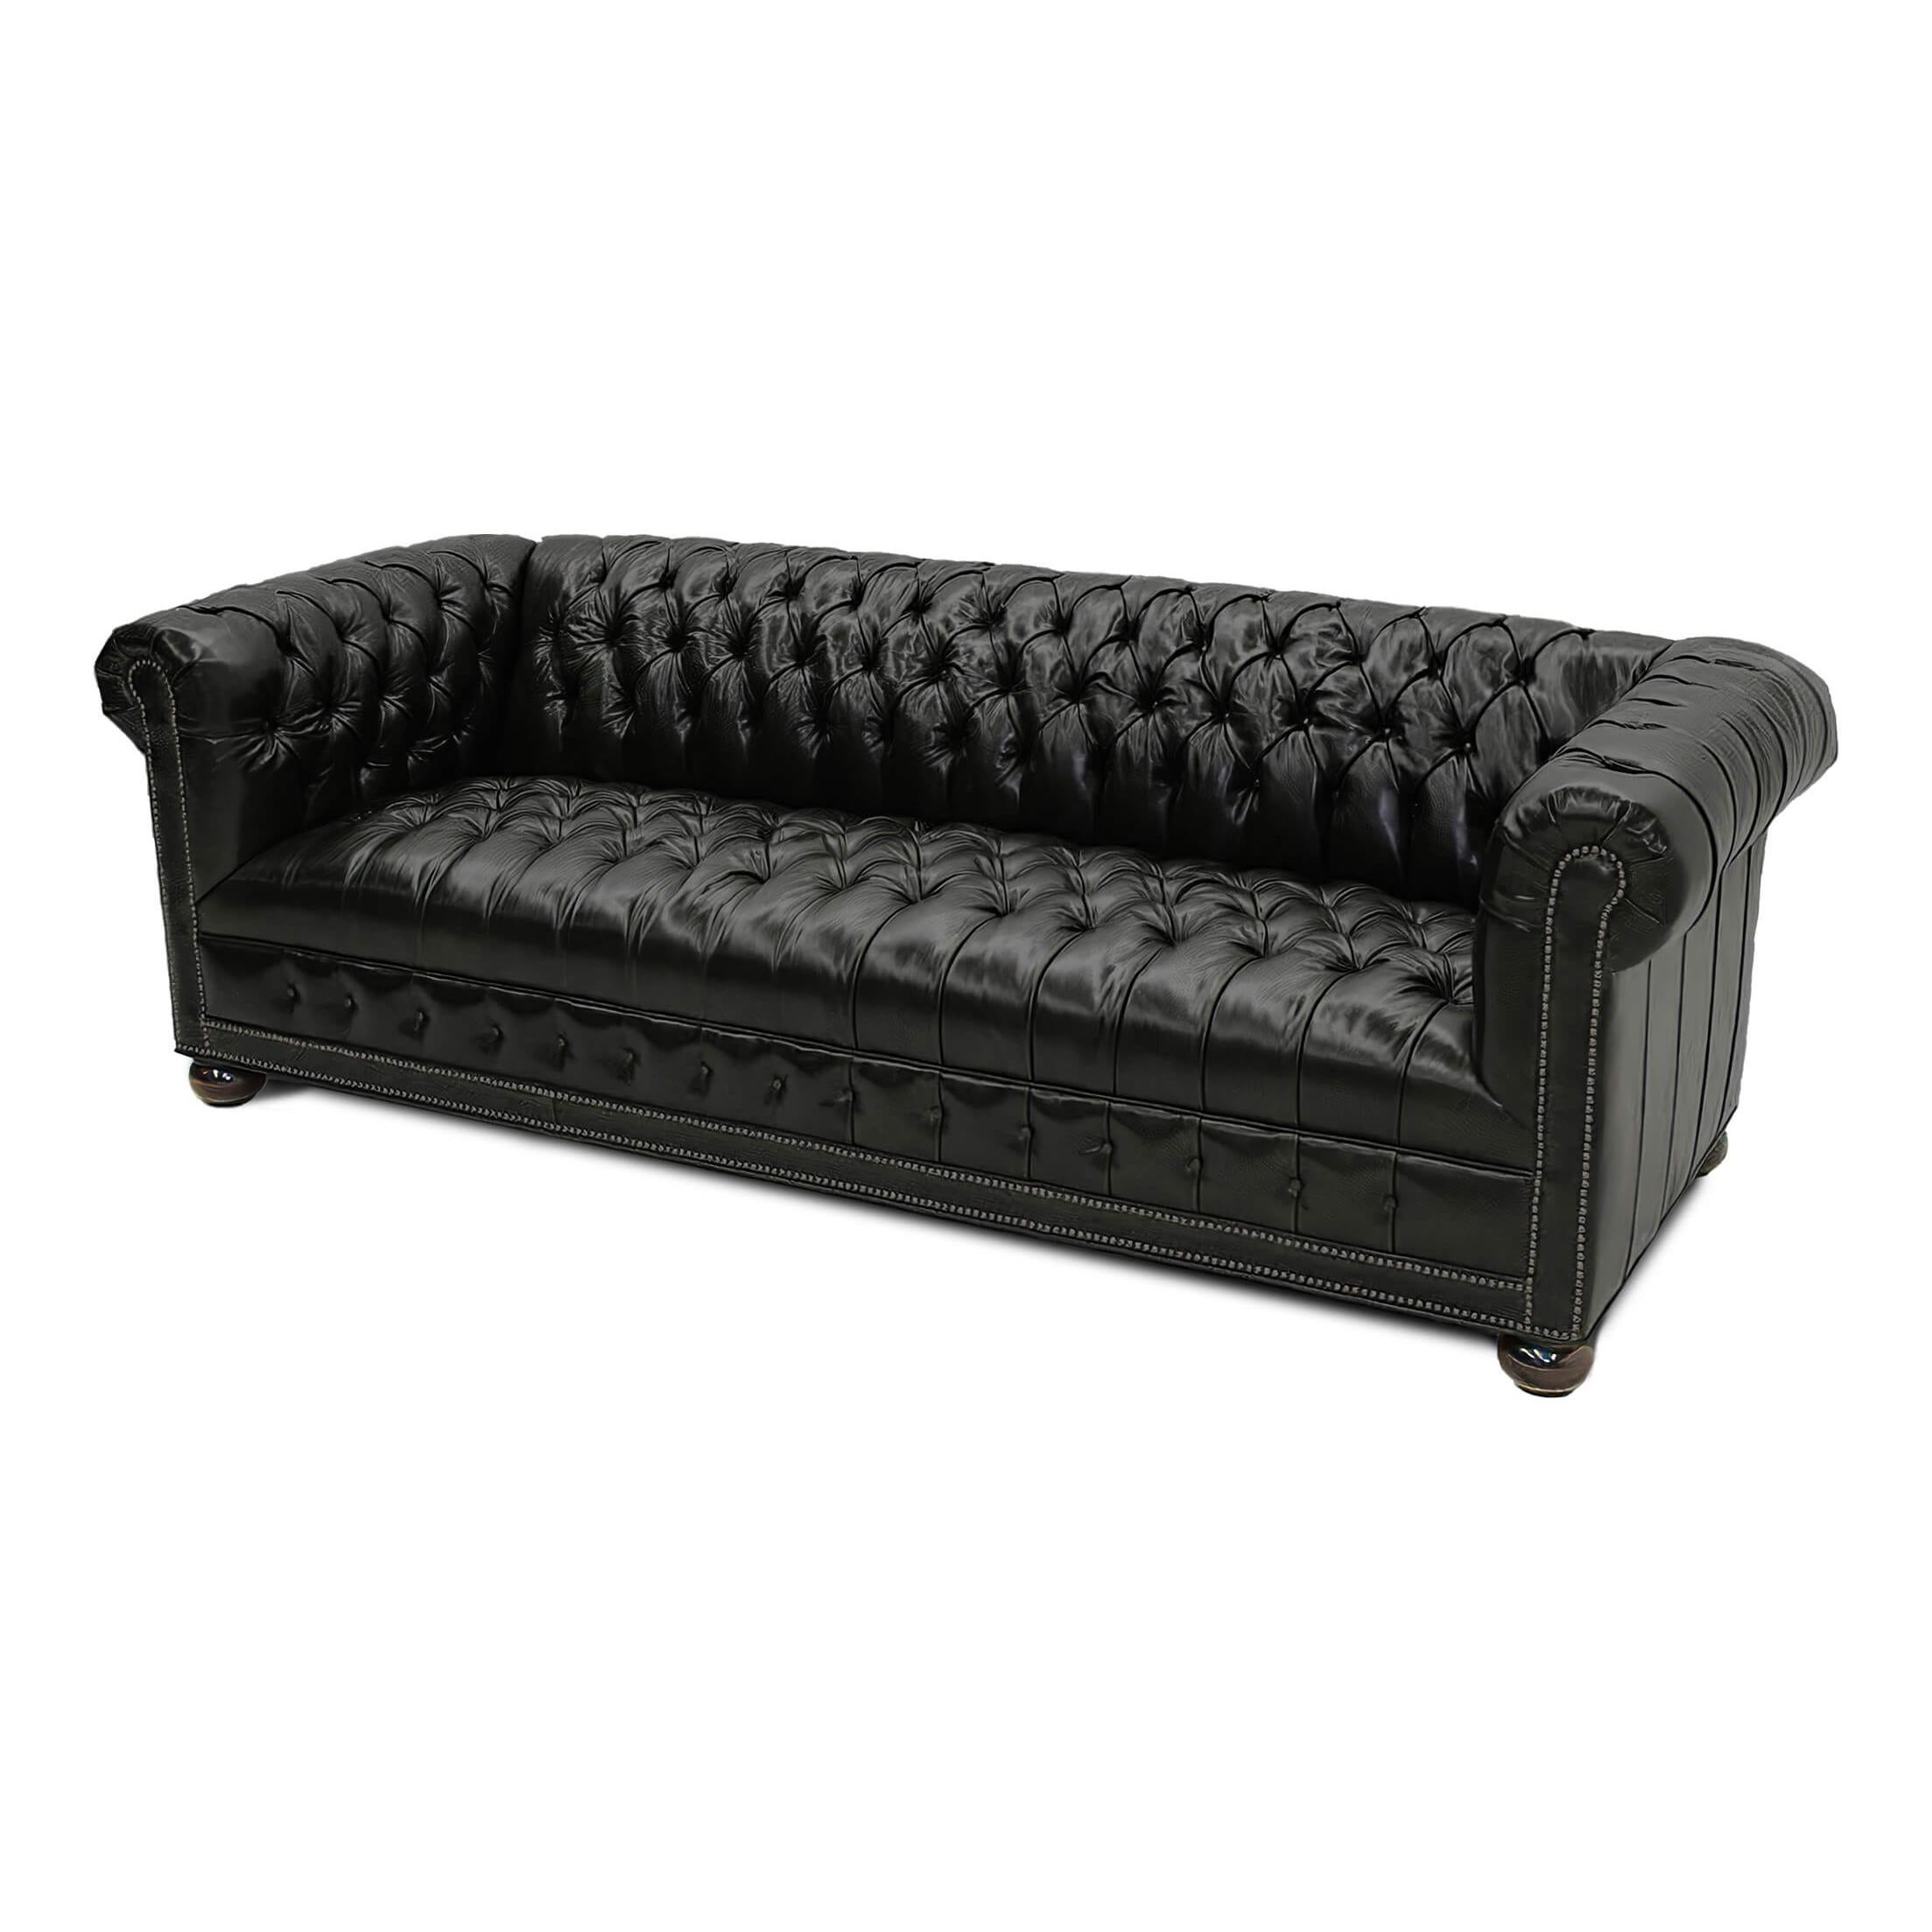 We offer an extensive collection and a fully customizable Chesterfield sofa program, made in America and produced within 8 weeks. Every element is customizable, from the leather or fabric to the dimensions, and the type of foot. 

We have added a